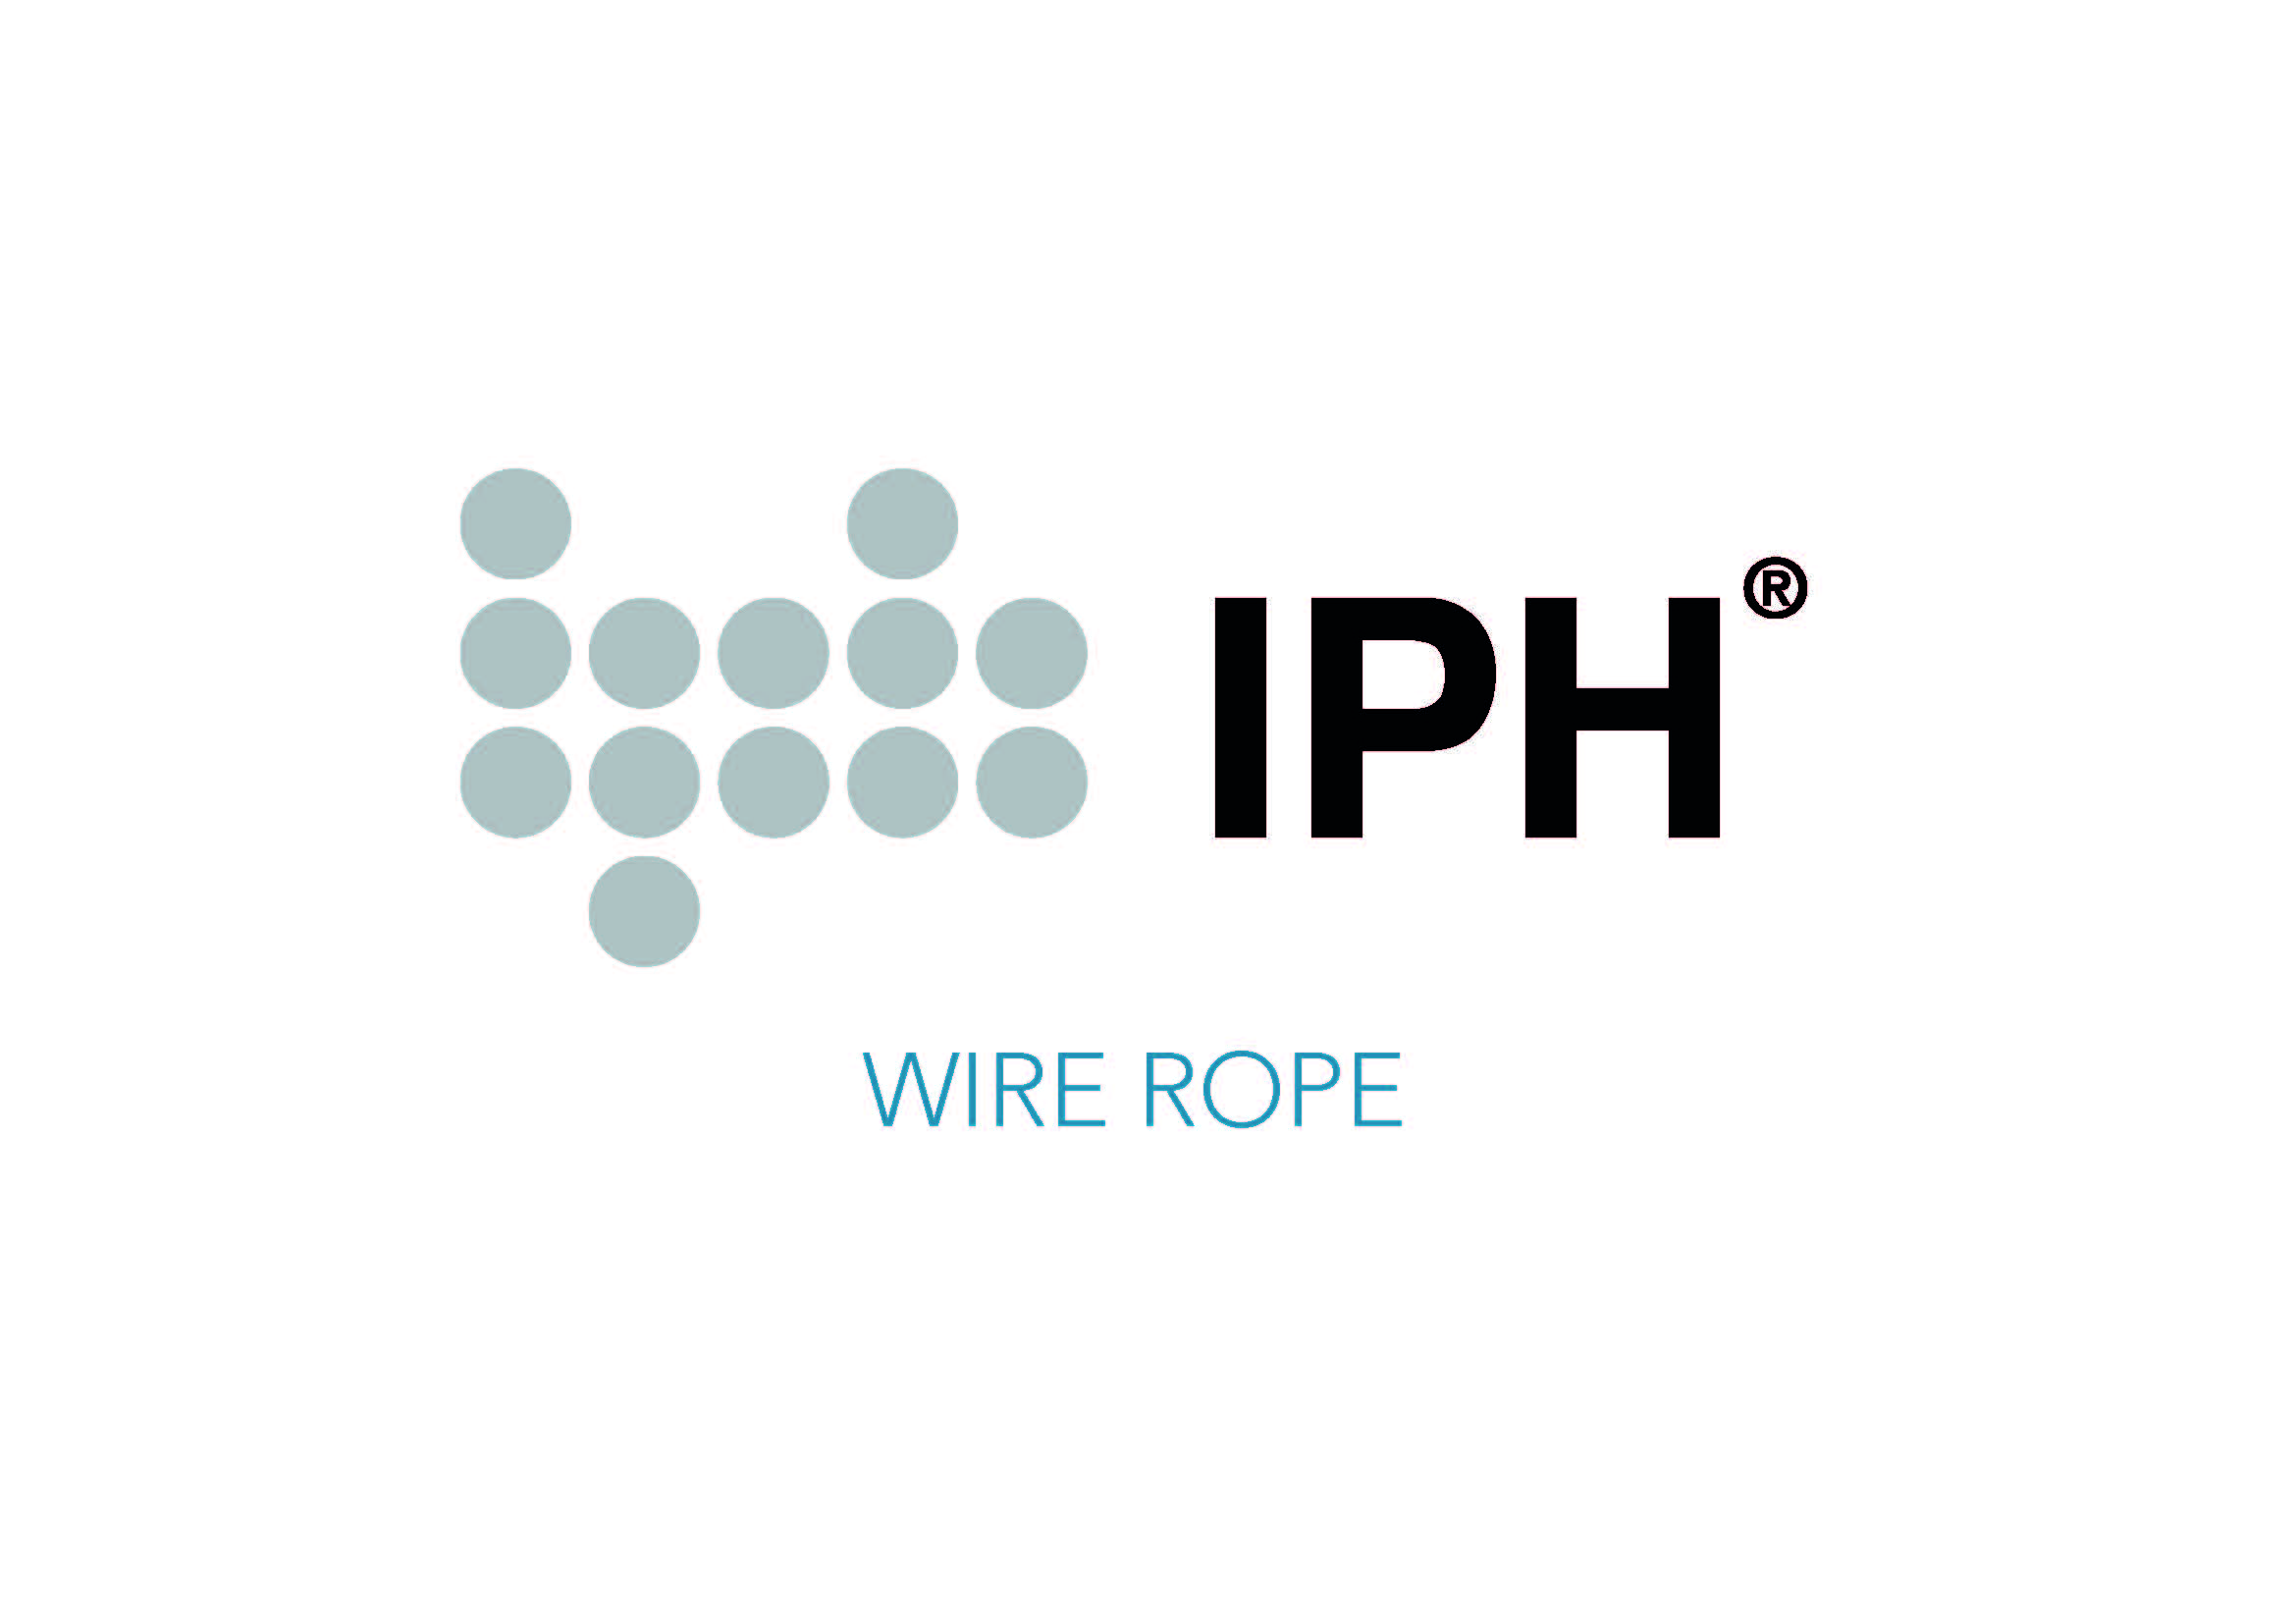 IPH WIRE ROPE 003